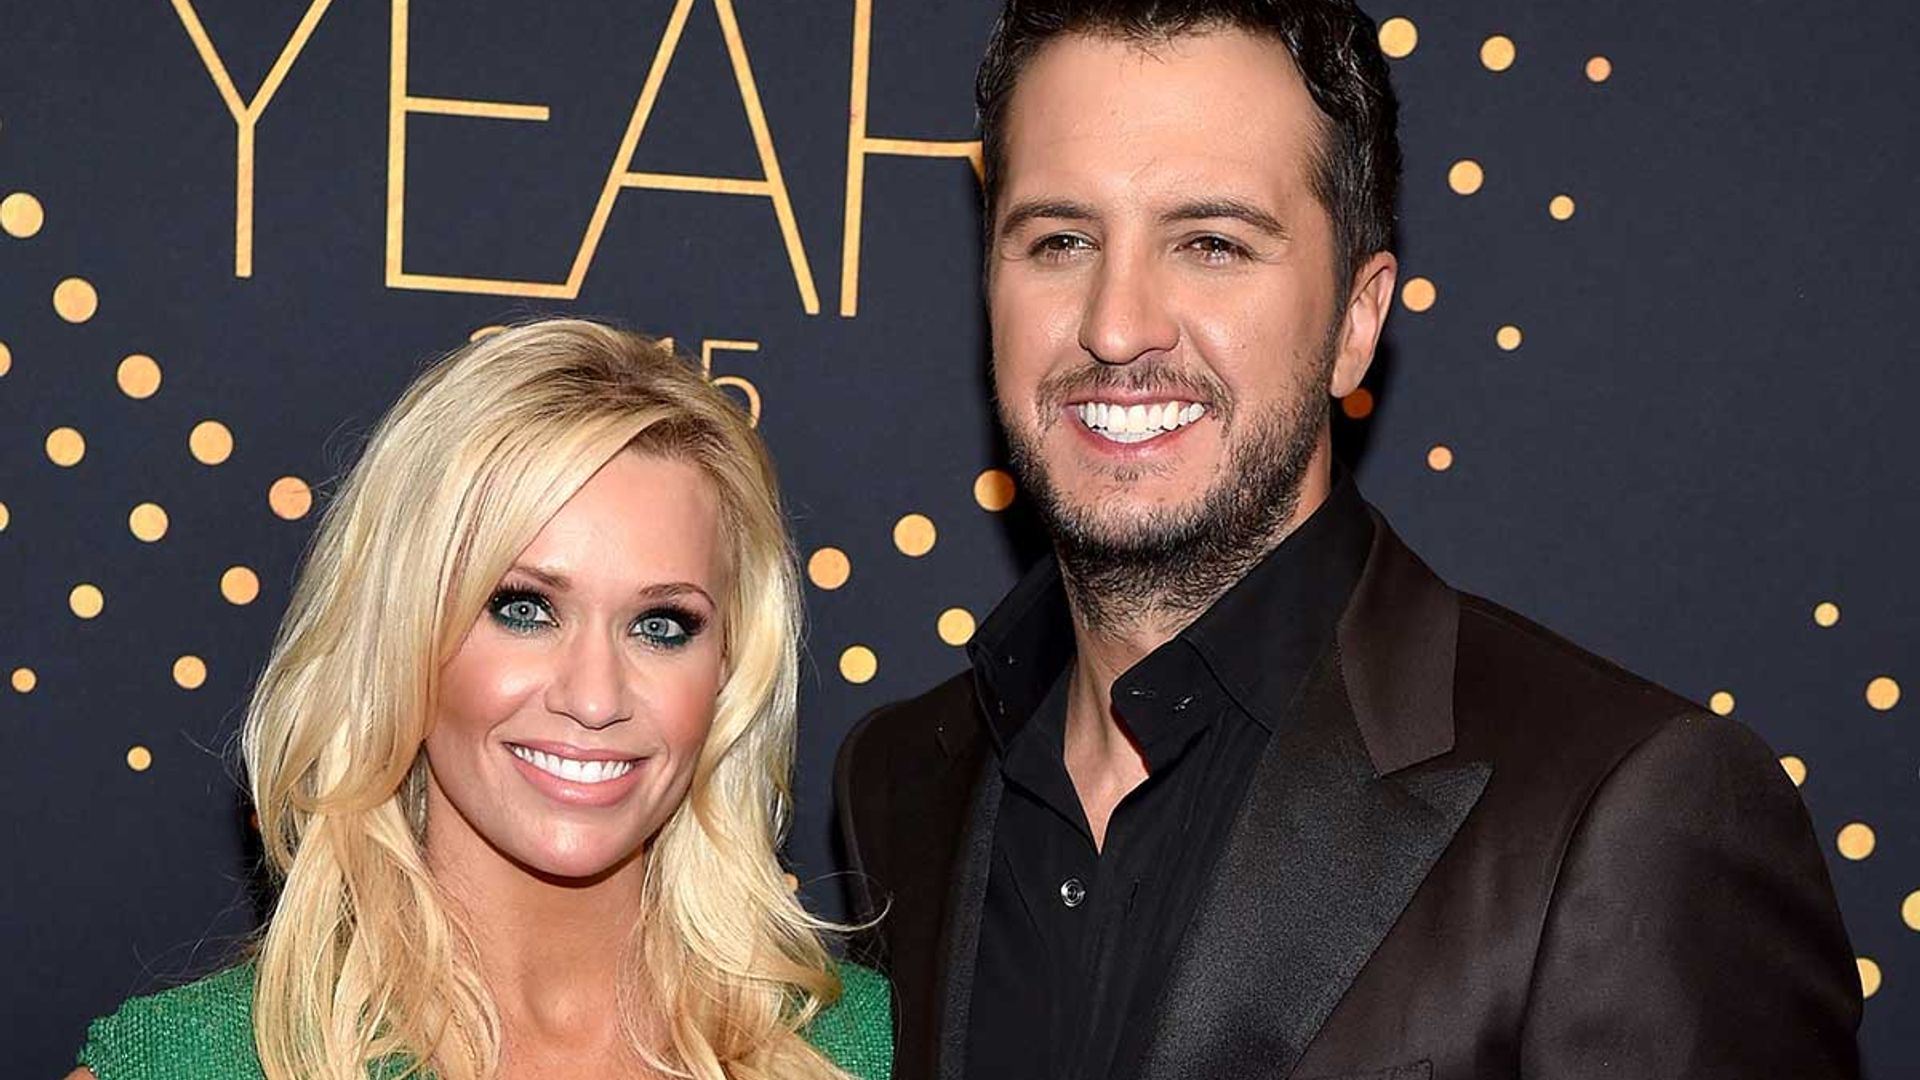 Luke Bryan's wife Caroline inundated with prayers after unexpected surgery